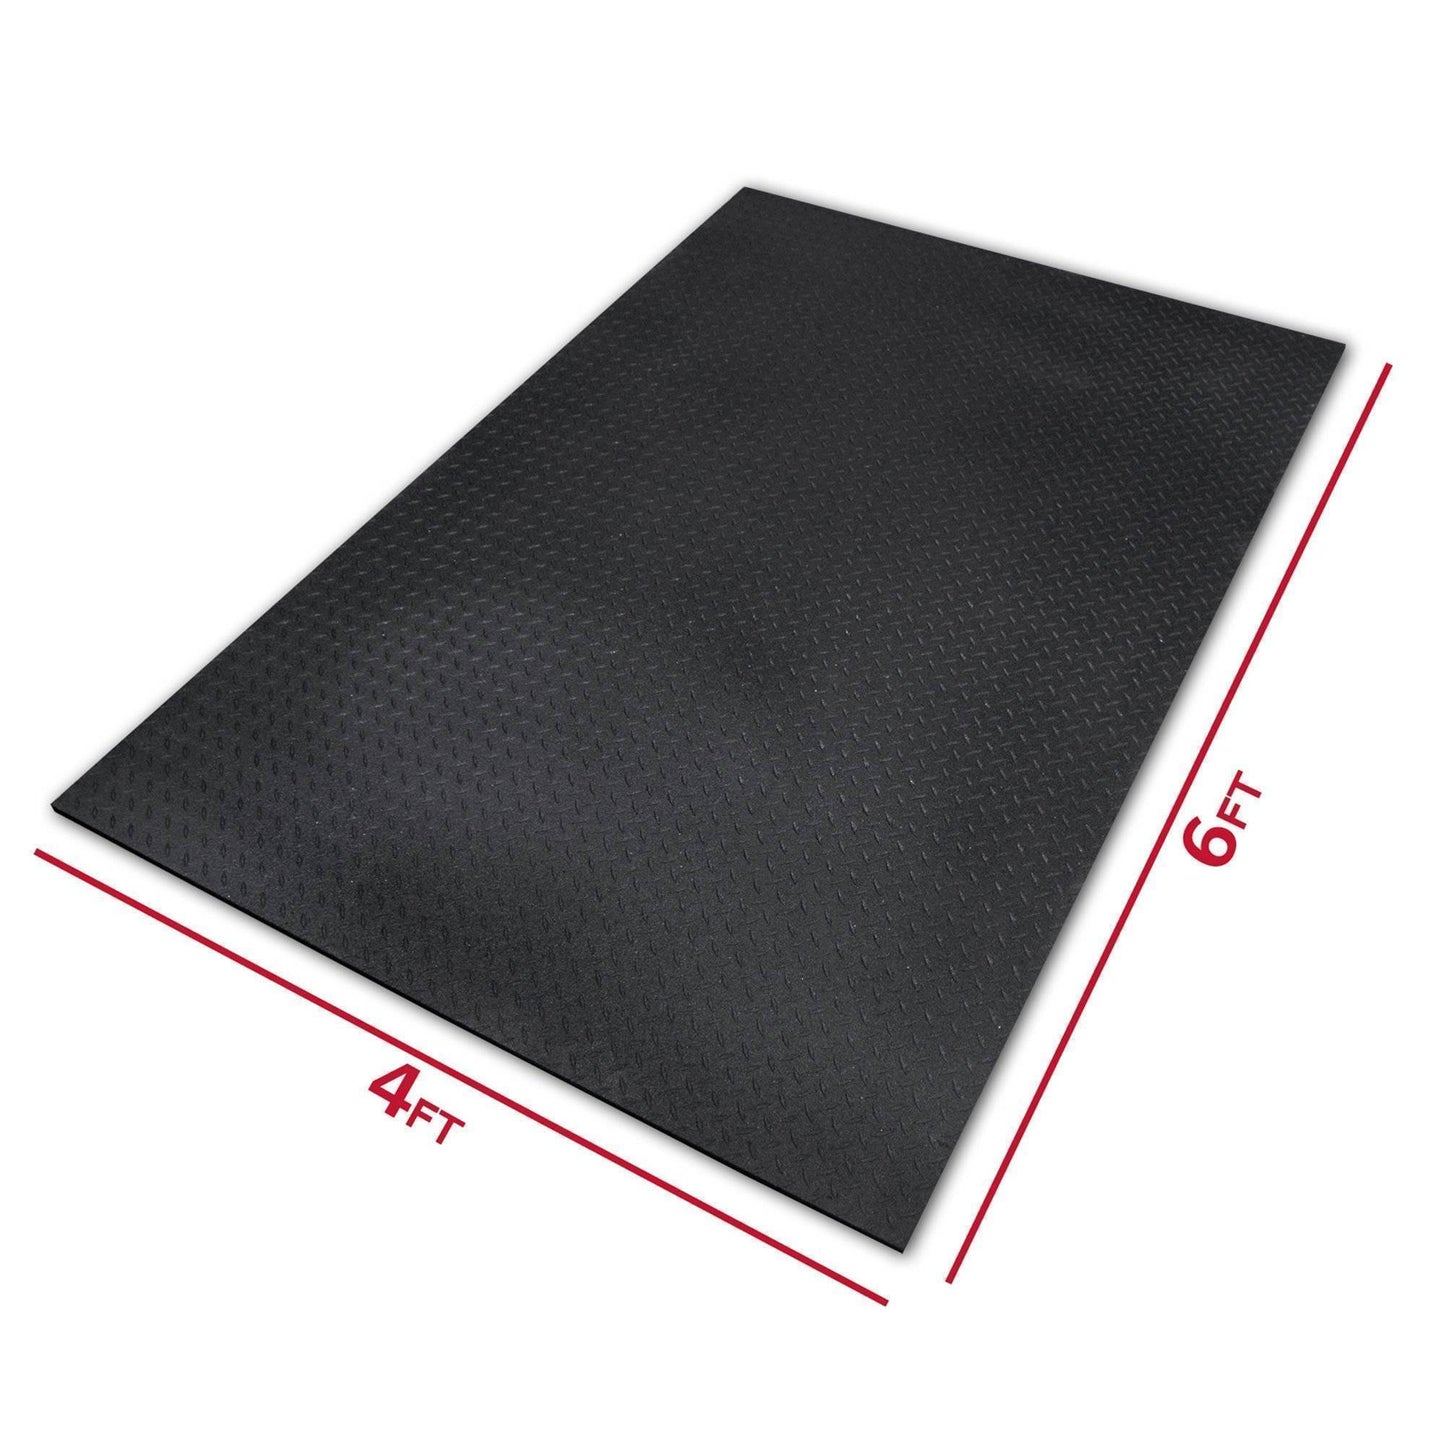 4' x 6' x 3/8" Solid Rubber Gym Mat